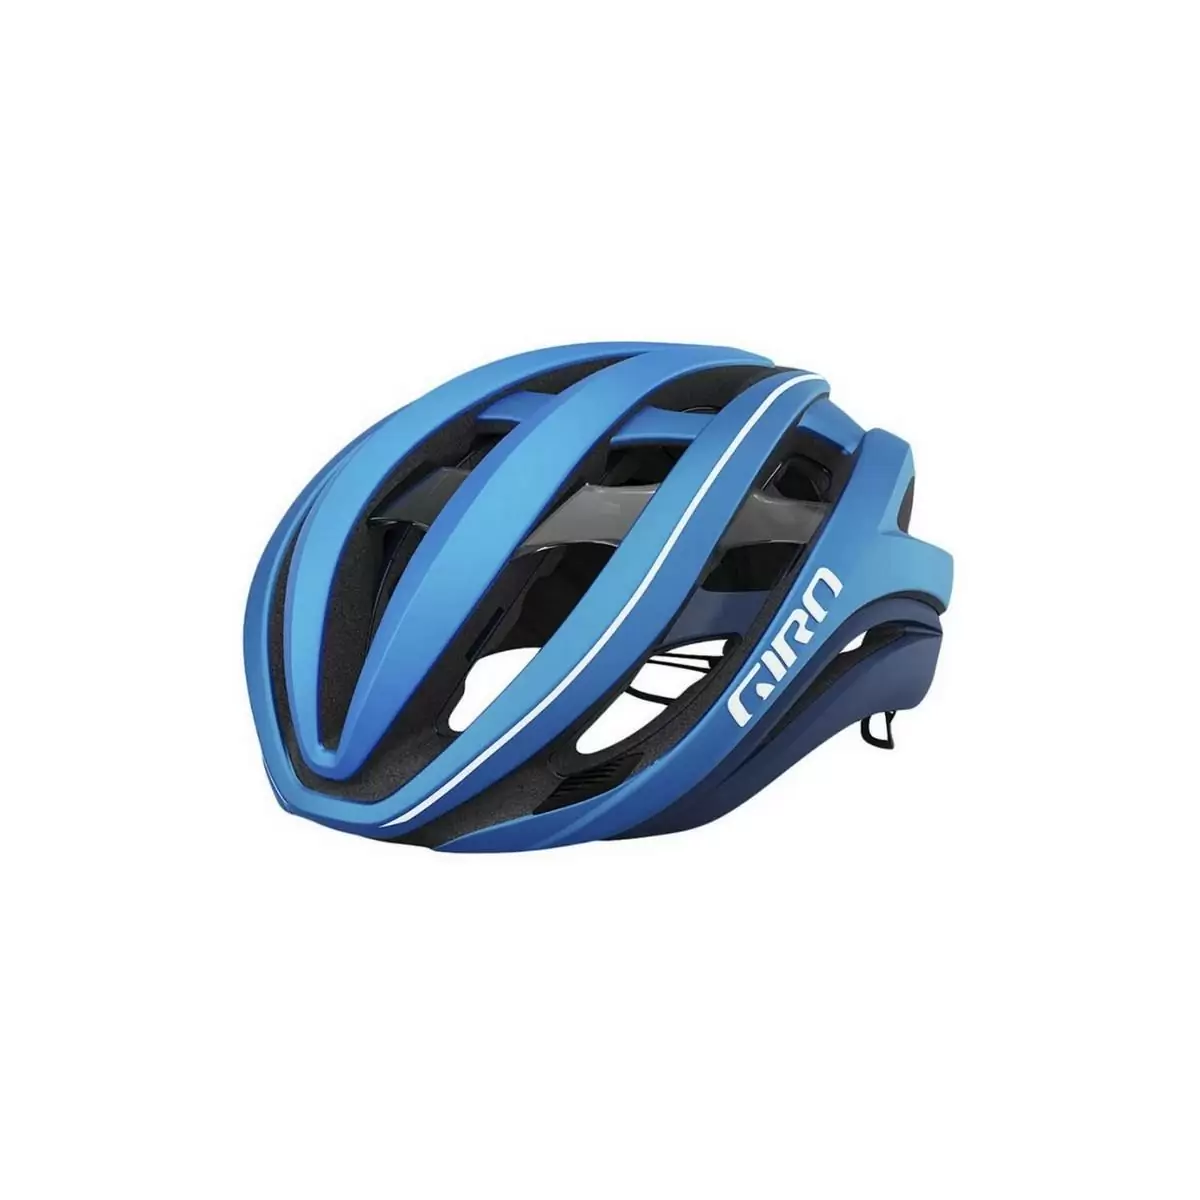 Casque Aether Spherical MIPS Bleu Taille L (59-63cm) - image